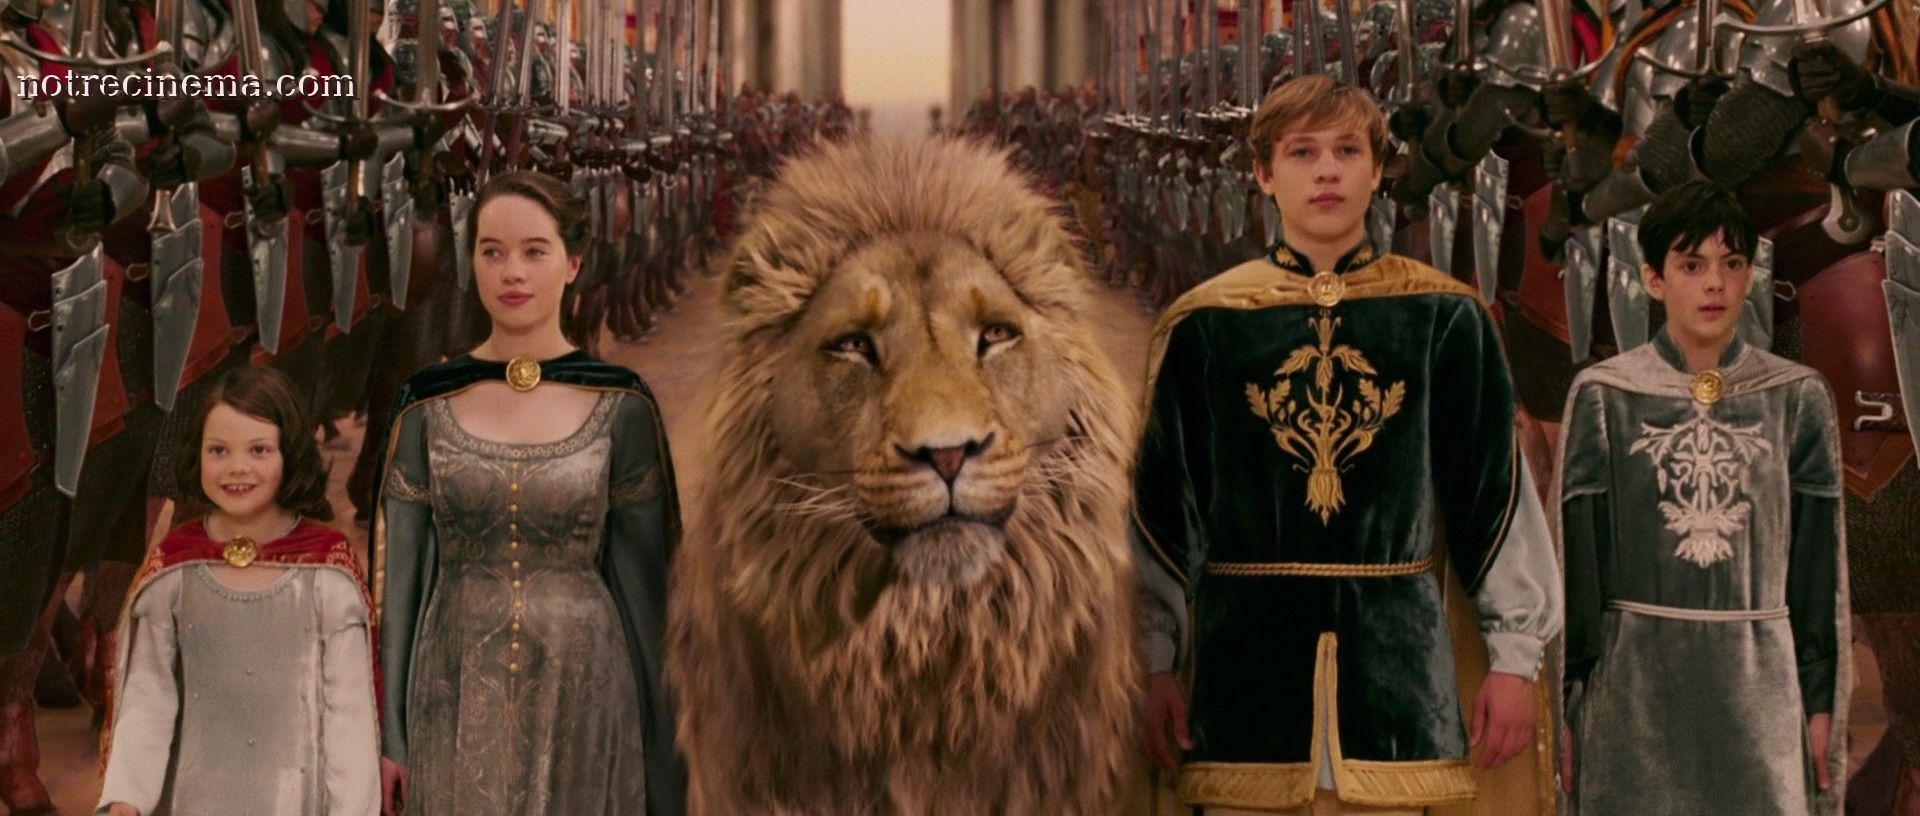 The Chronicles of Narnia, The Lion, the Witch and the Wardrobe